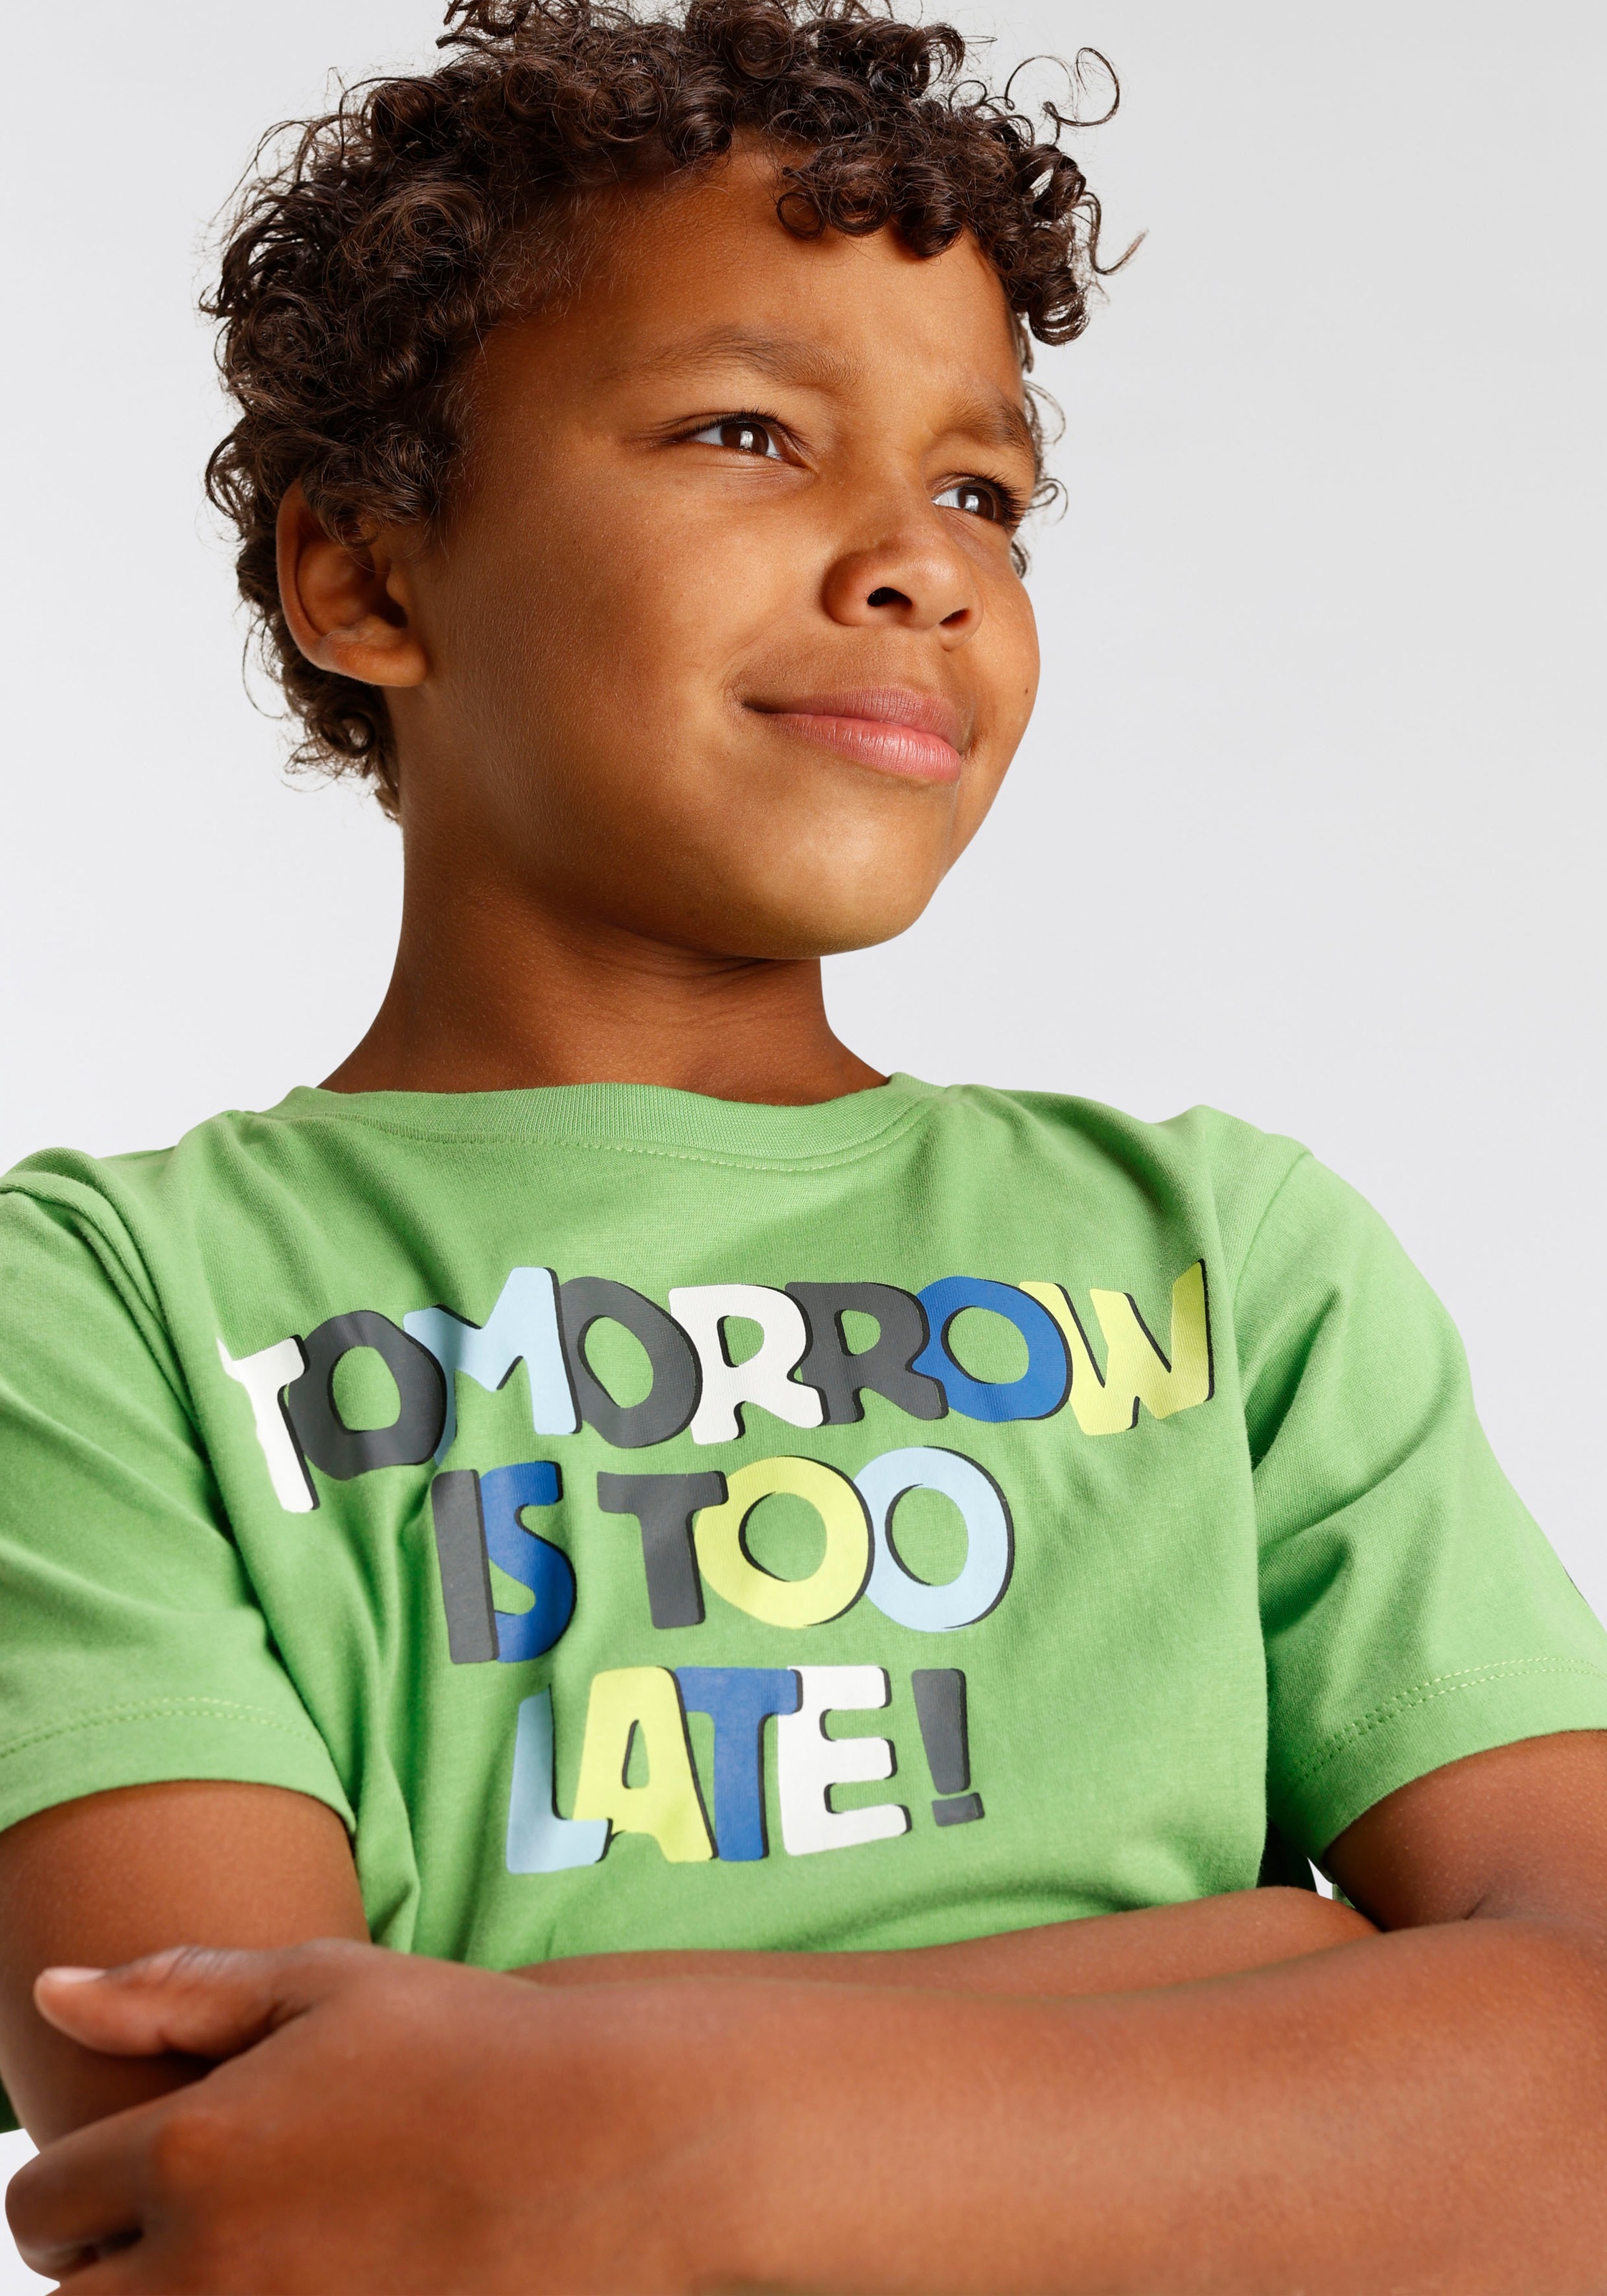 KIDSWORLD »TOMORROW Spruch LATE«, TOO IS OTTO bei T-Shirt